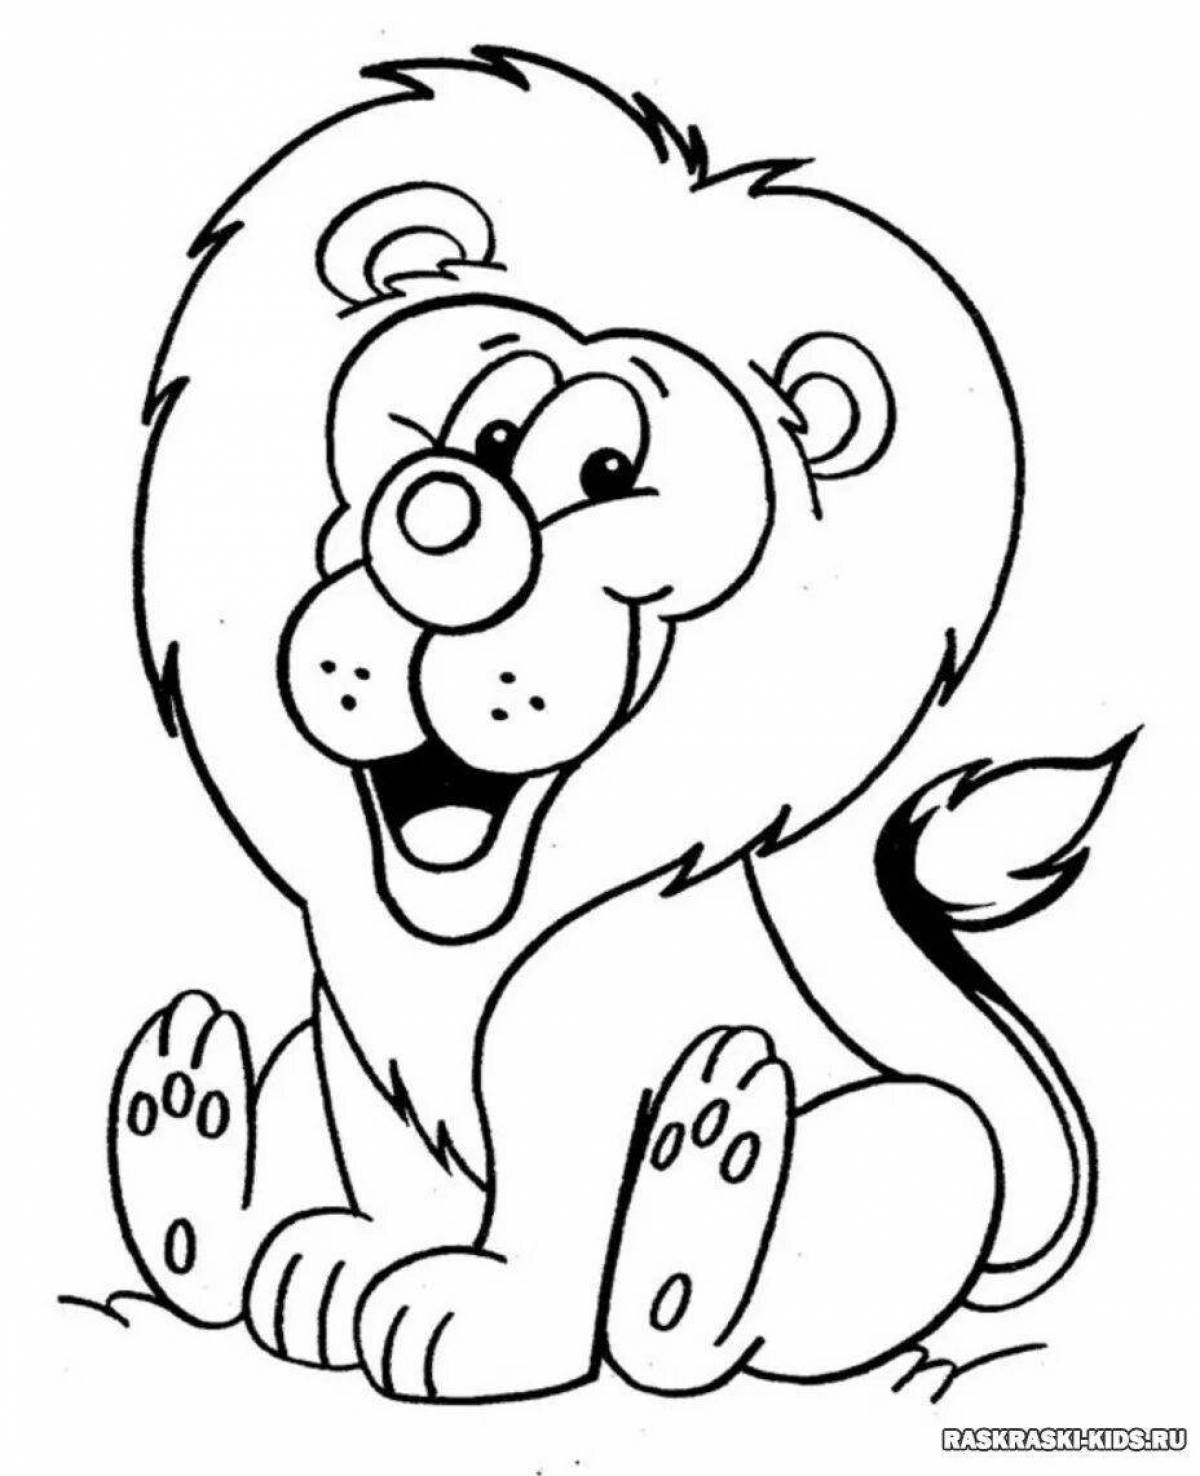 Coloring page energetic lion